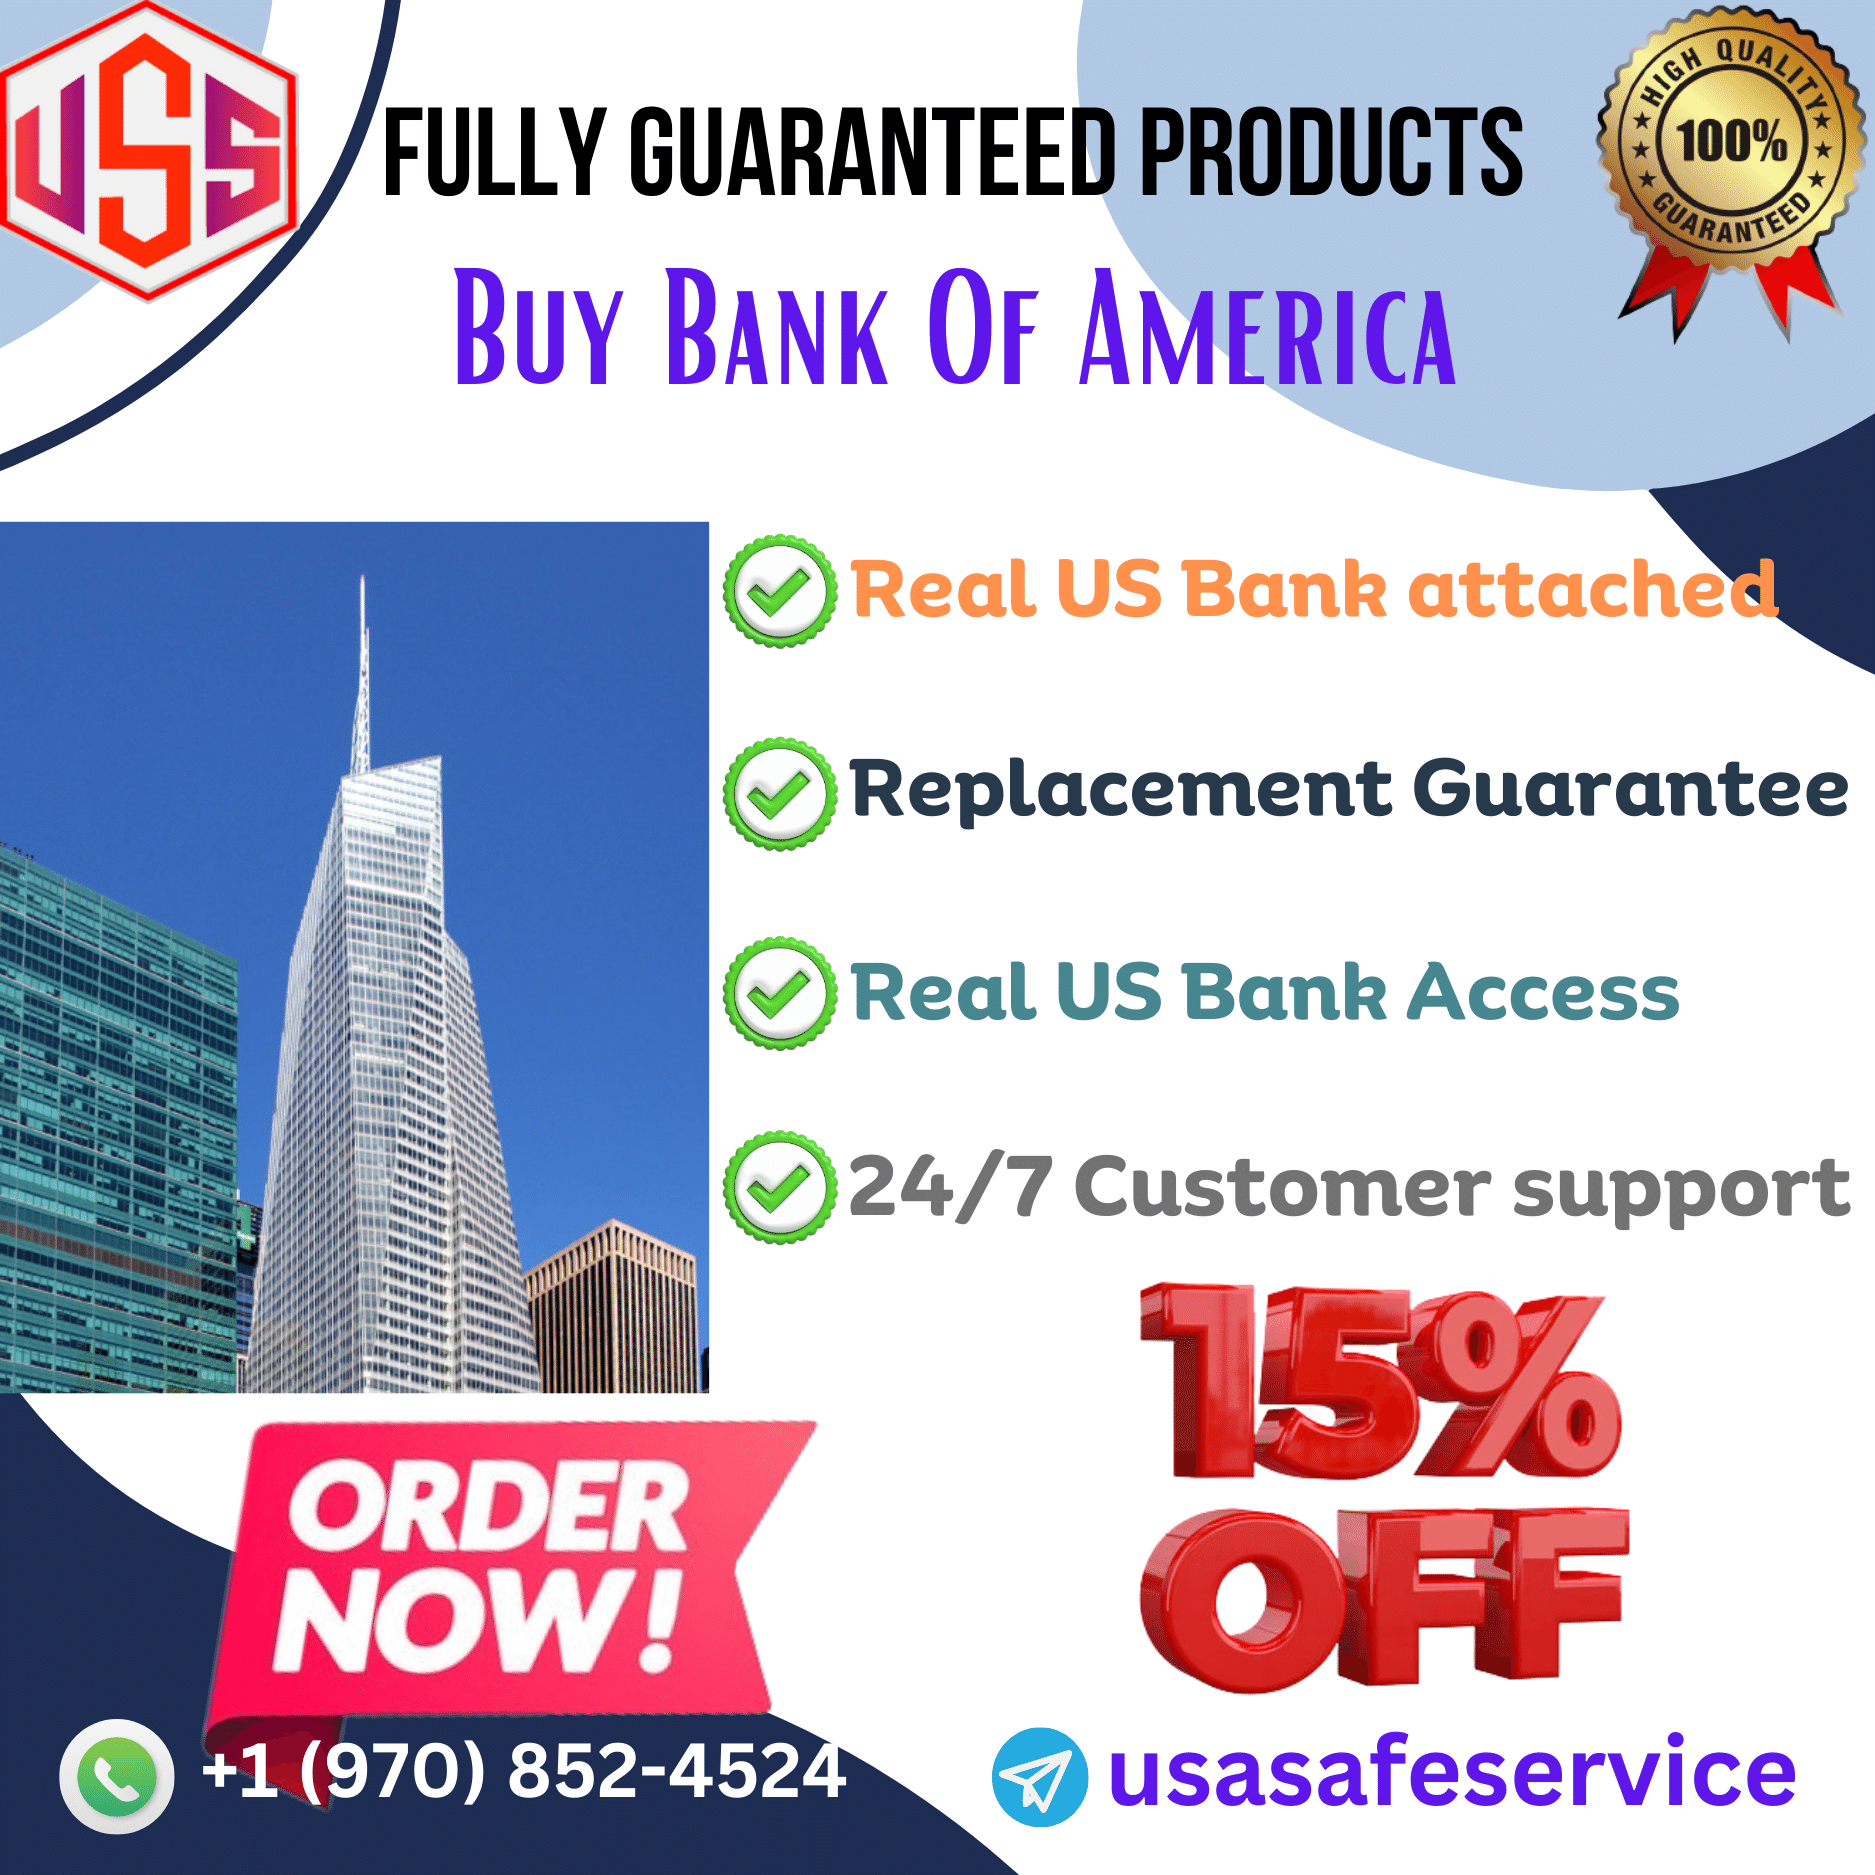 Buy Bank Of America - 100% Verified & Trusted Account..